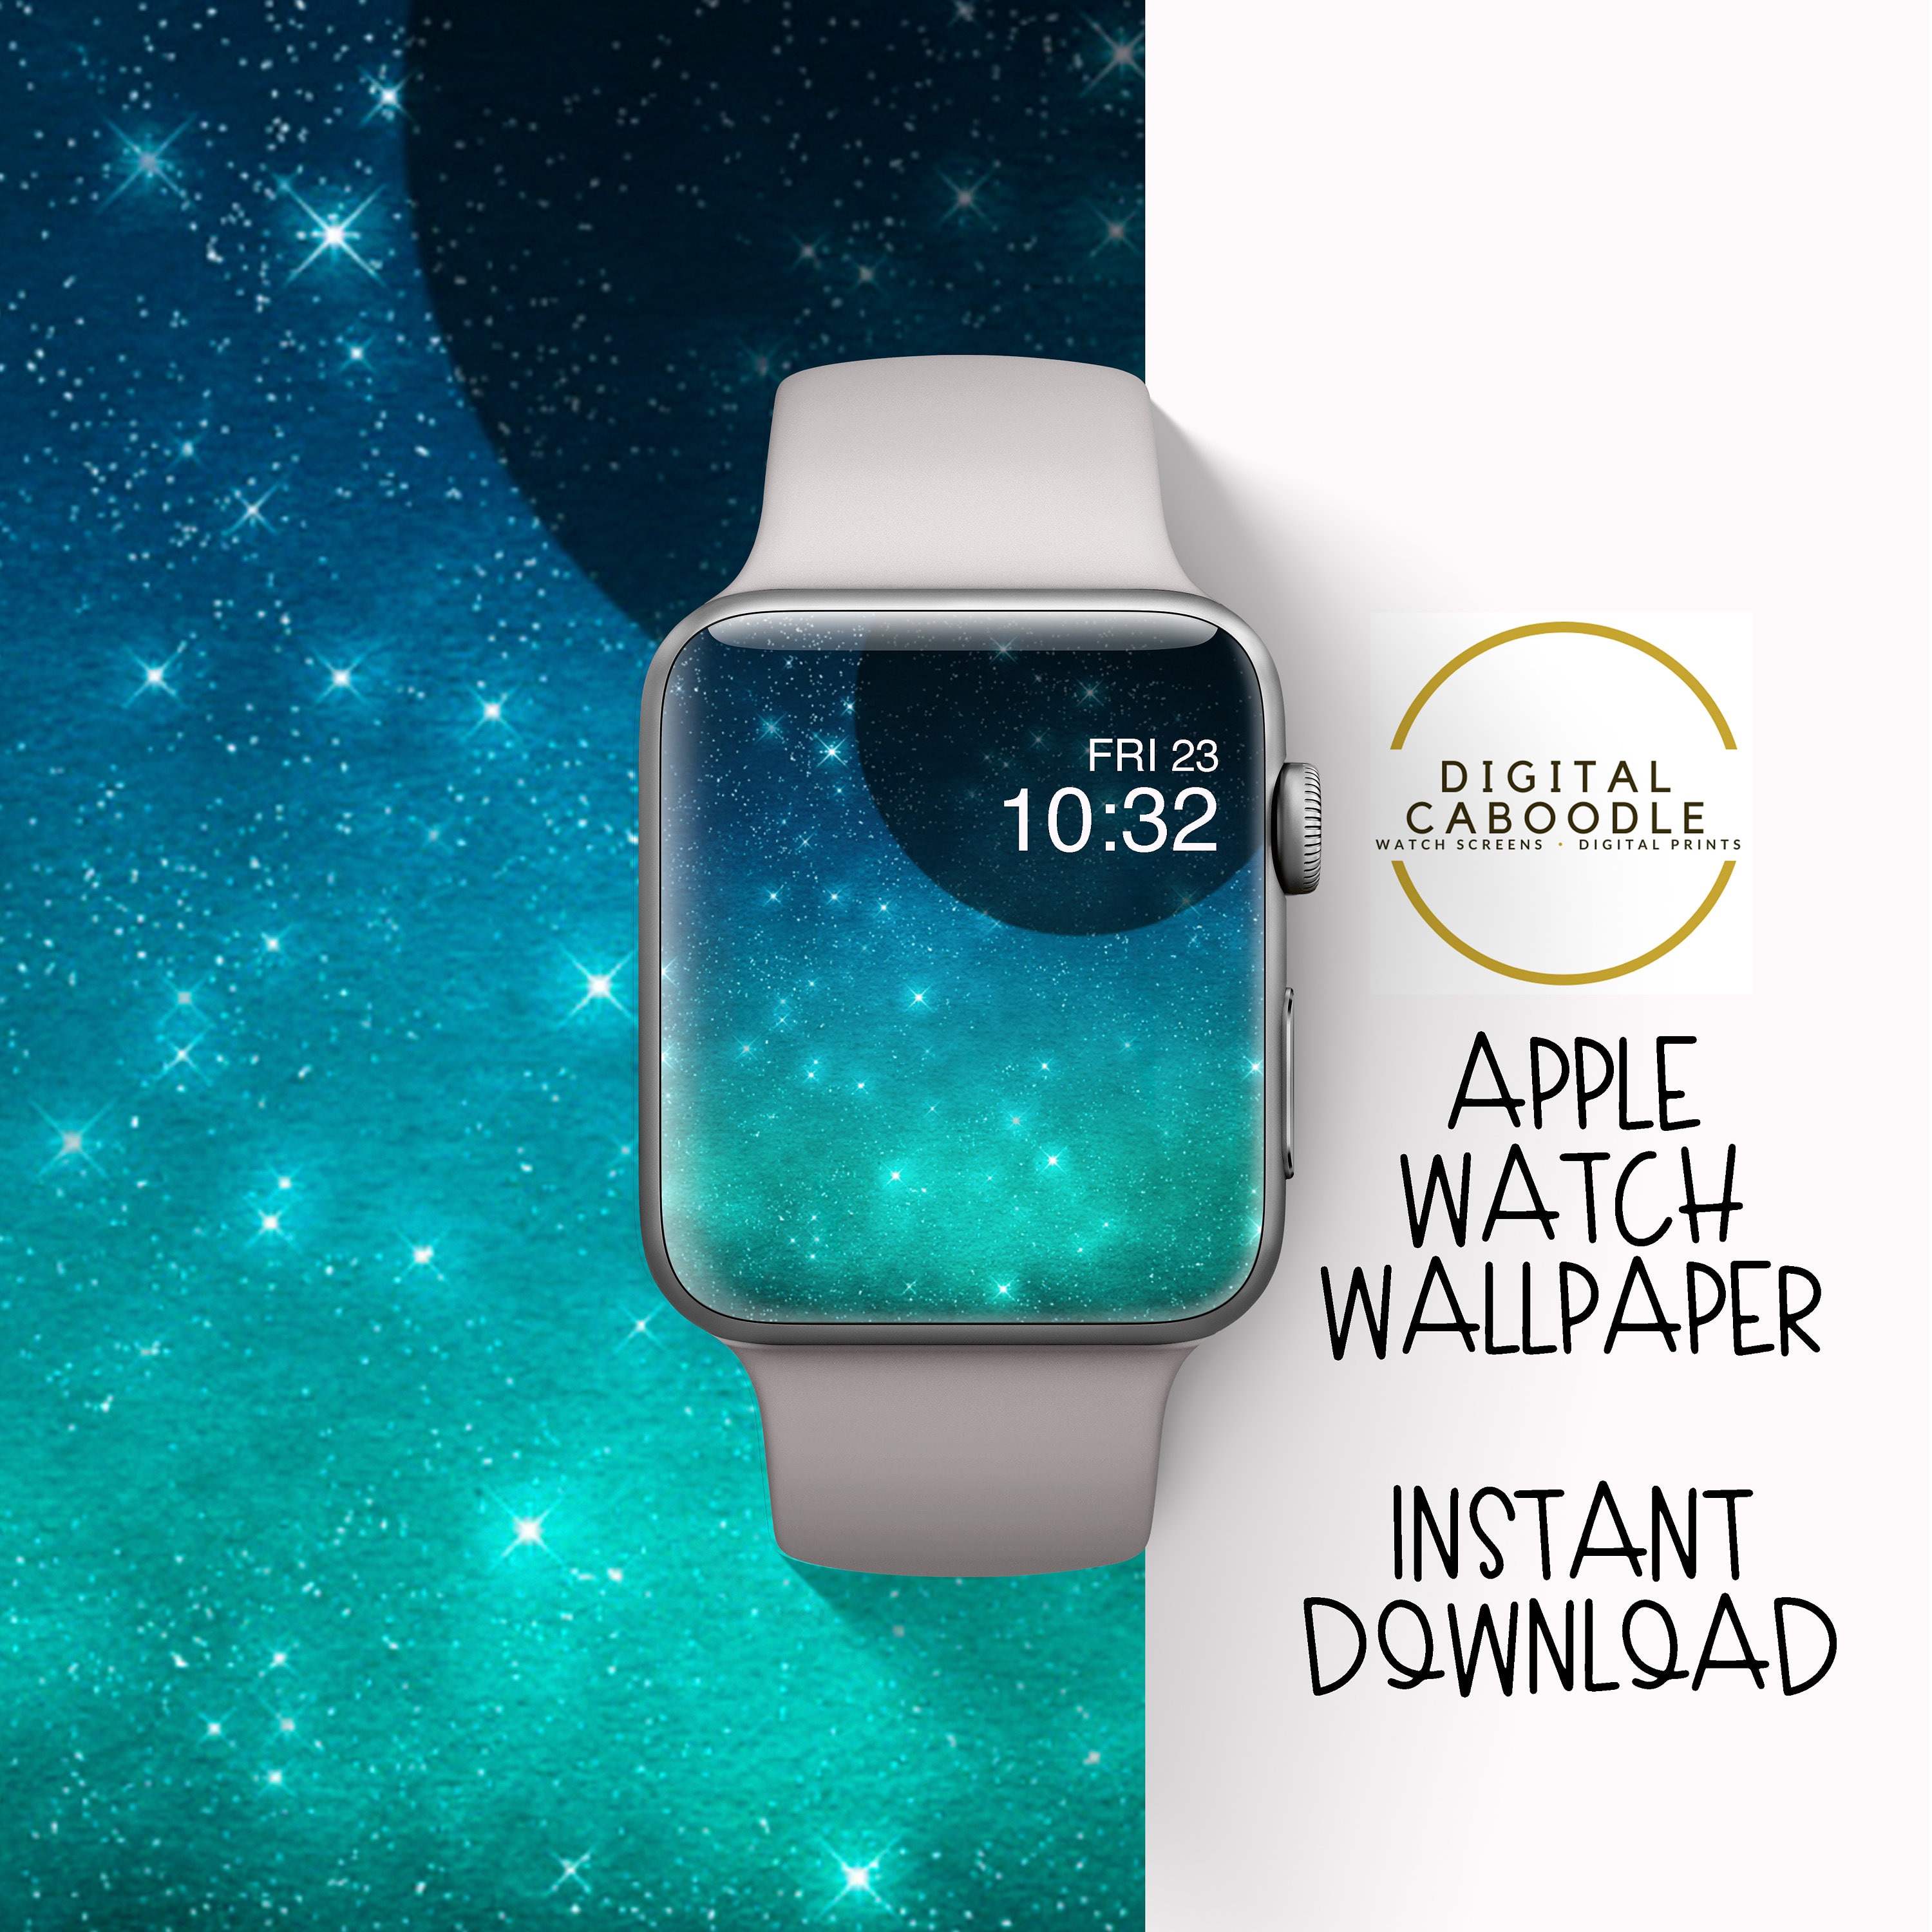 Wallpaper for Smart Watch Wallpaper With Space Scene Smart - Etsy New  Zealand